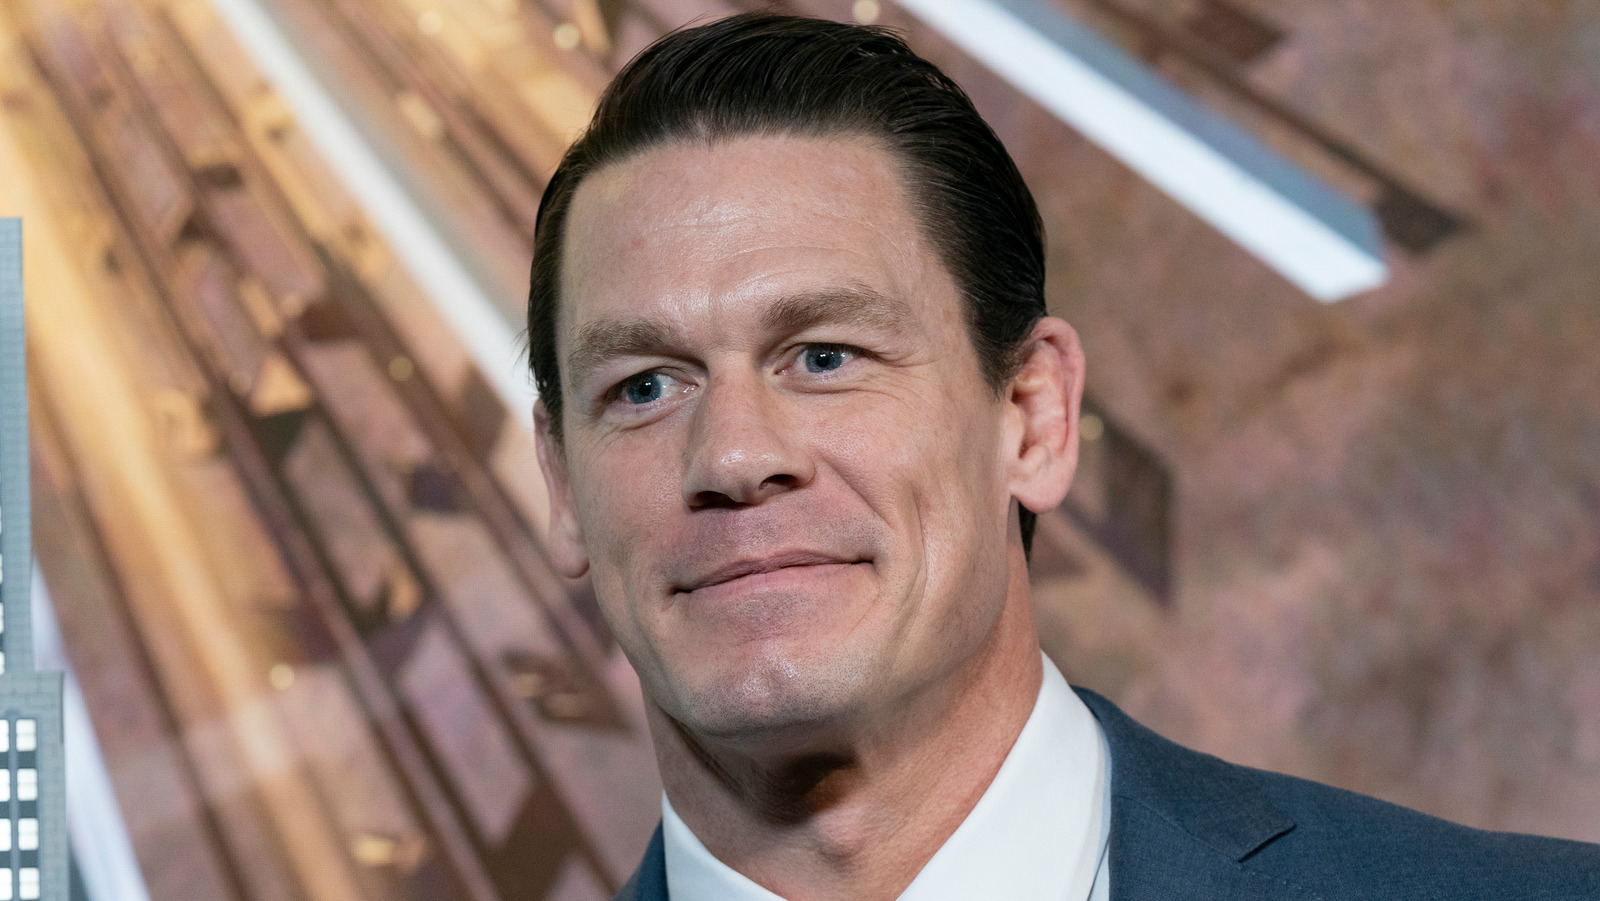 The Major Deadpool 2 Role John Cena Auditioned For